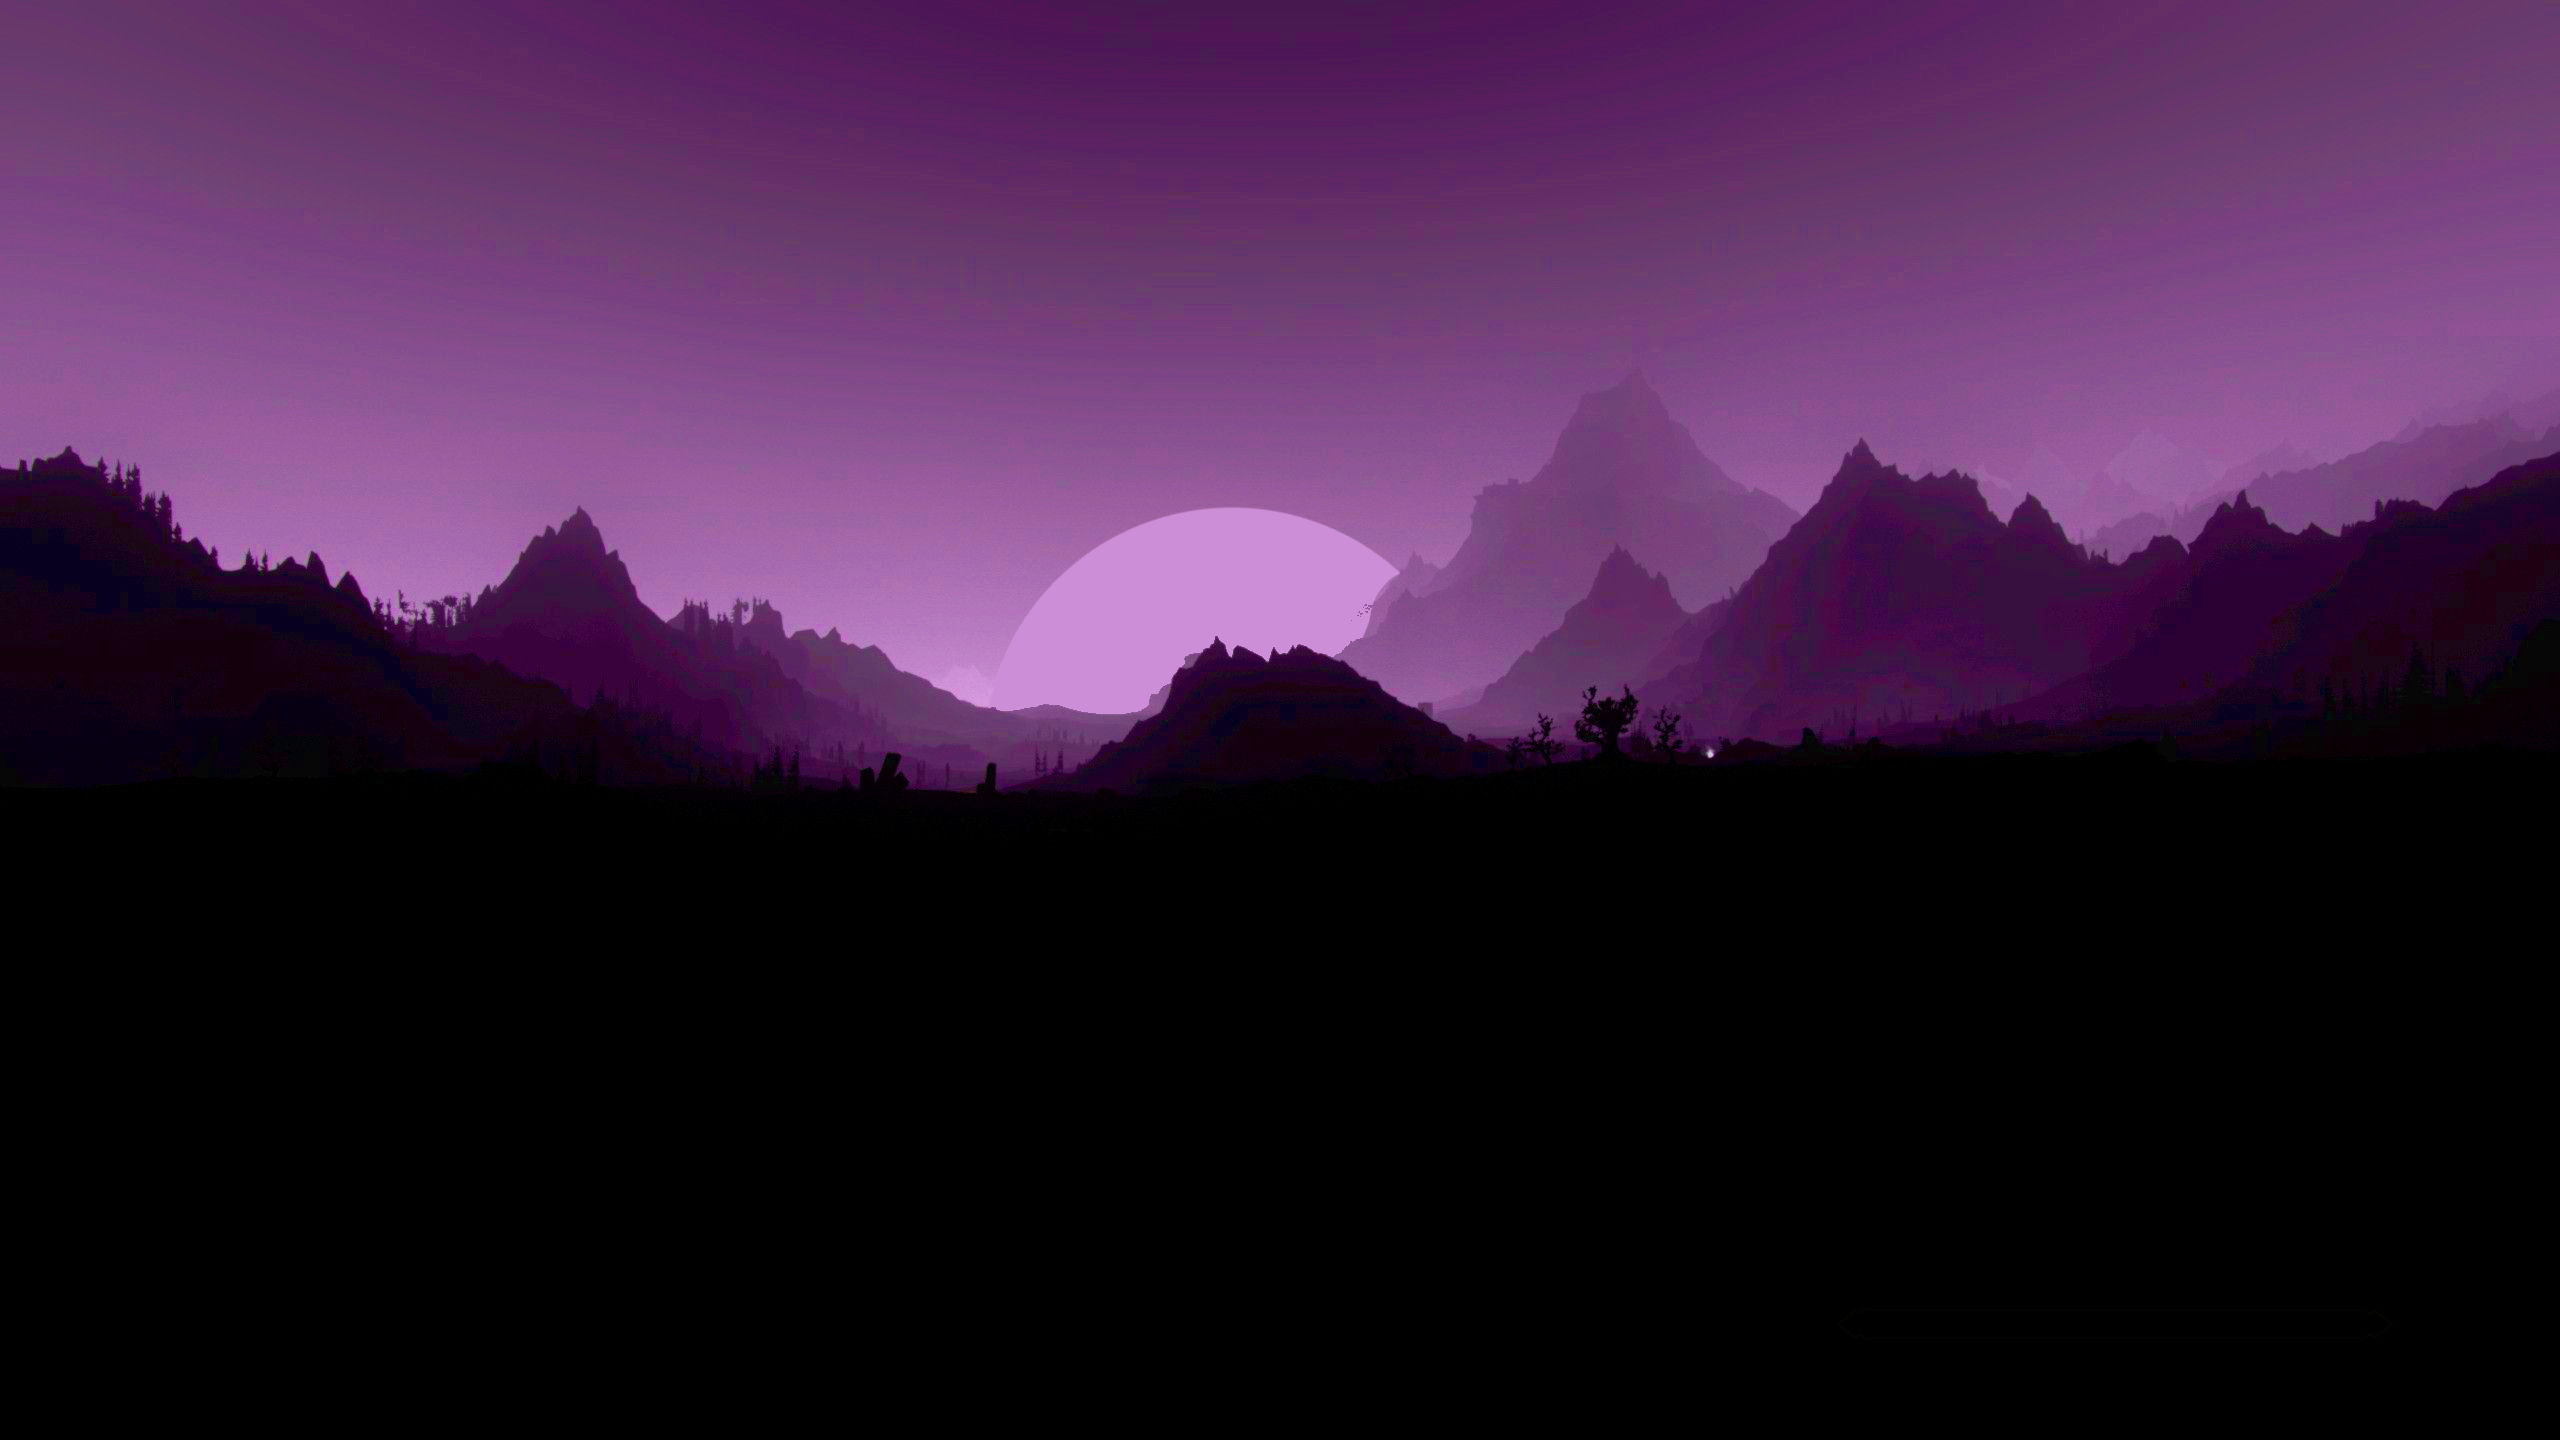 Purple 4K wallpapers for your desktop or mobile screen free and easy to